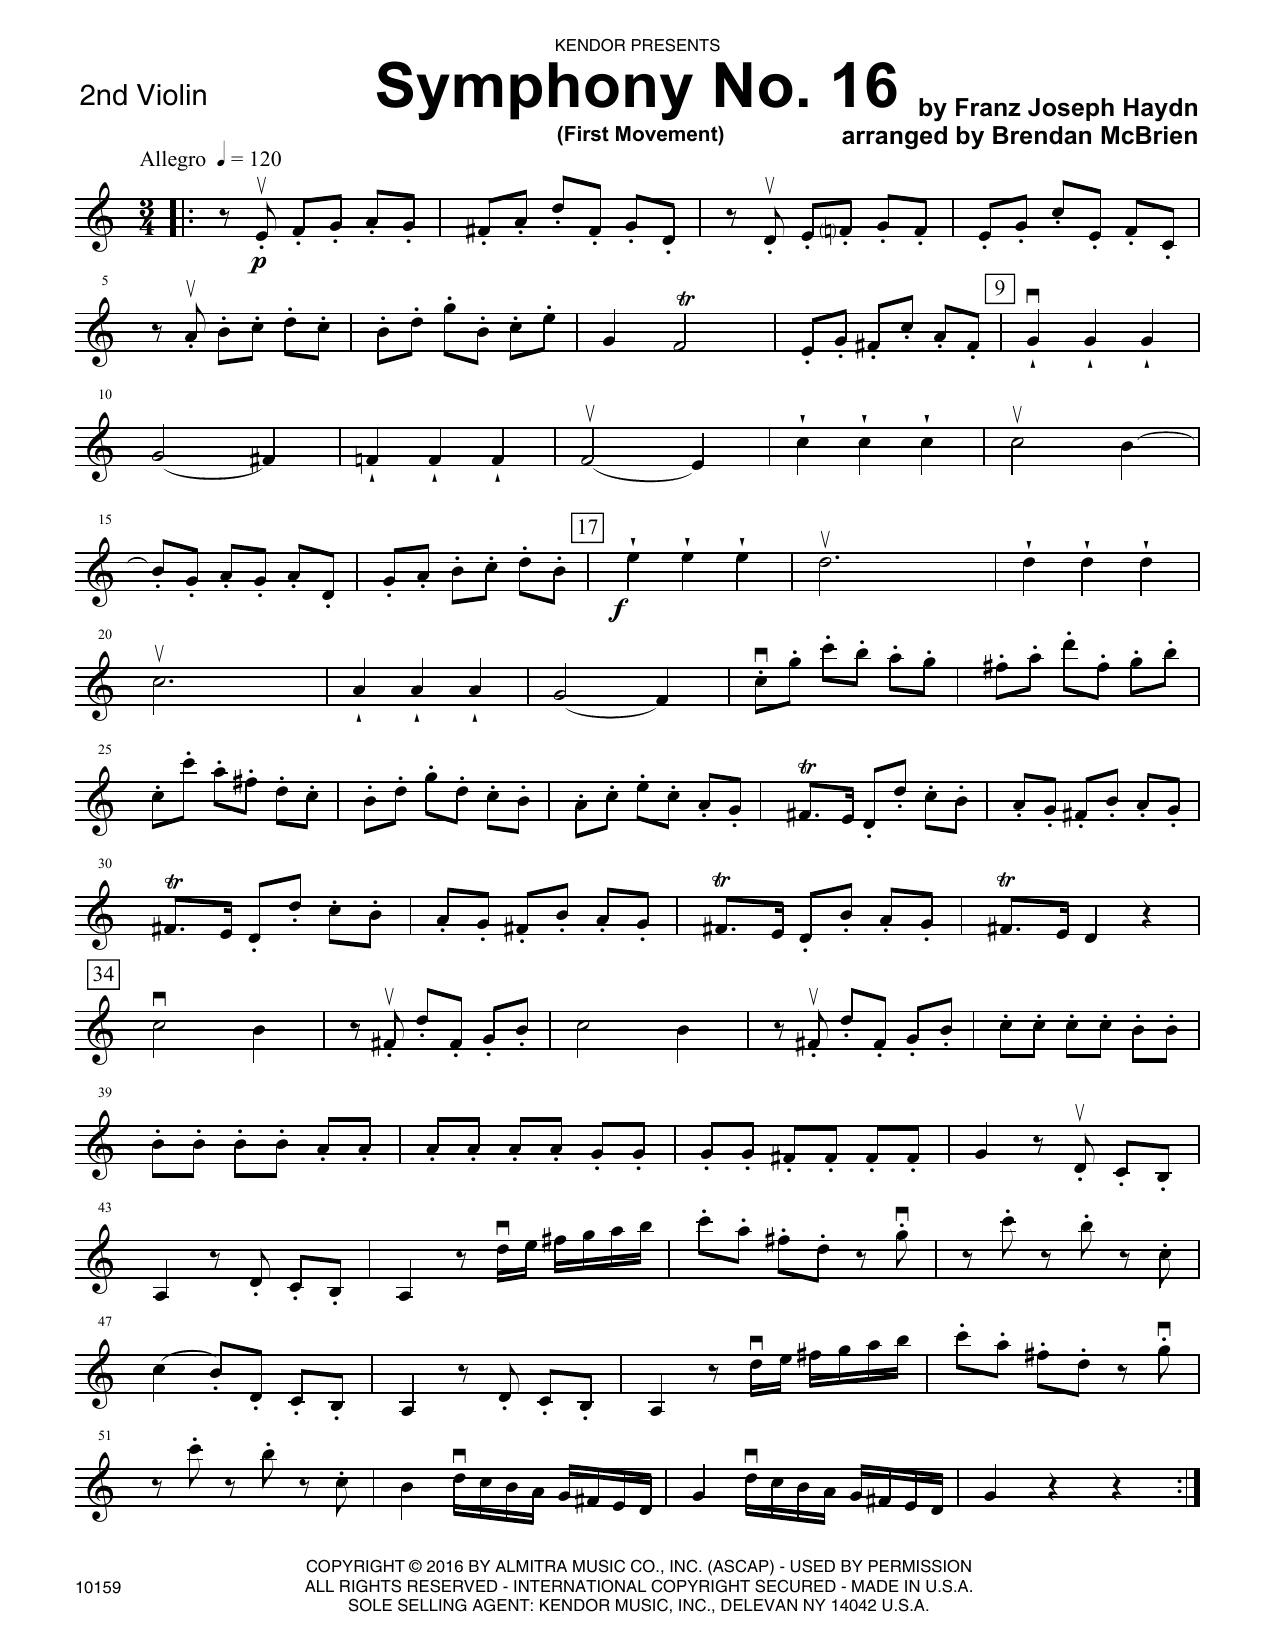 Download Brian McBrien Symphony No. 16 (First Movement) - 2nd Sheet Music